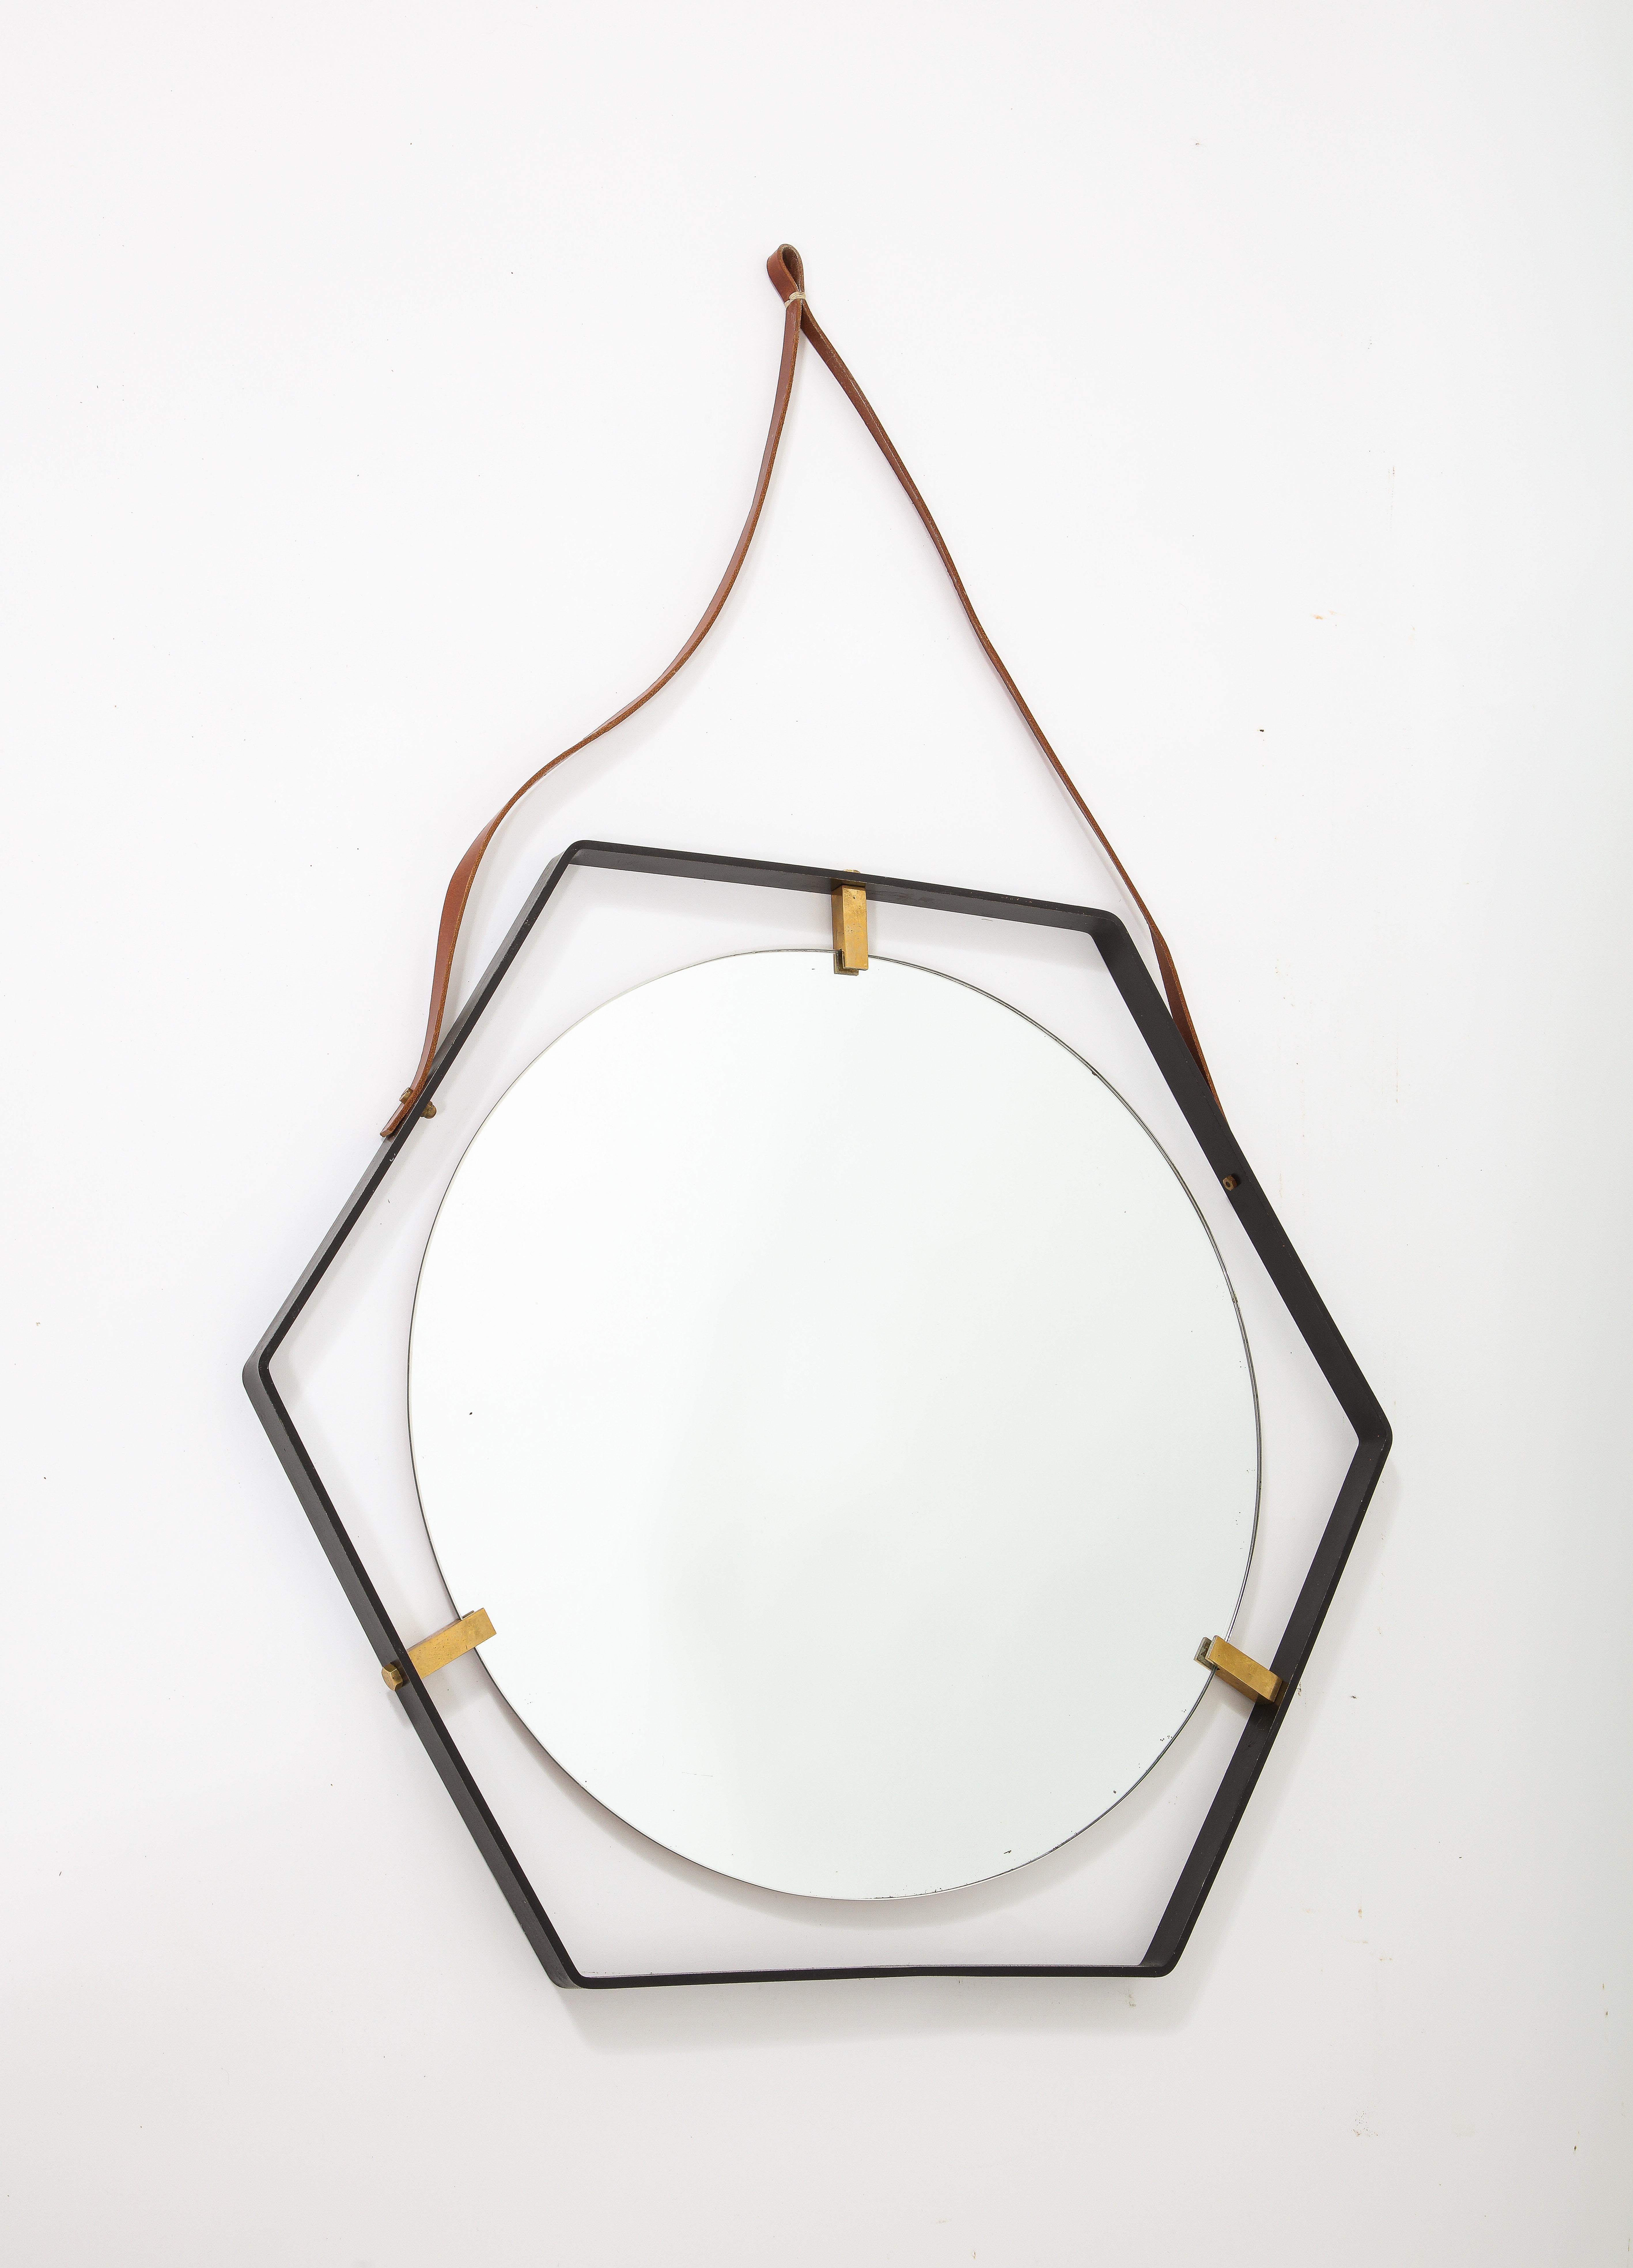 Octagonal Wrought Iron Mirror on Leather Strap, France 1960's For Sale 1